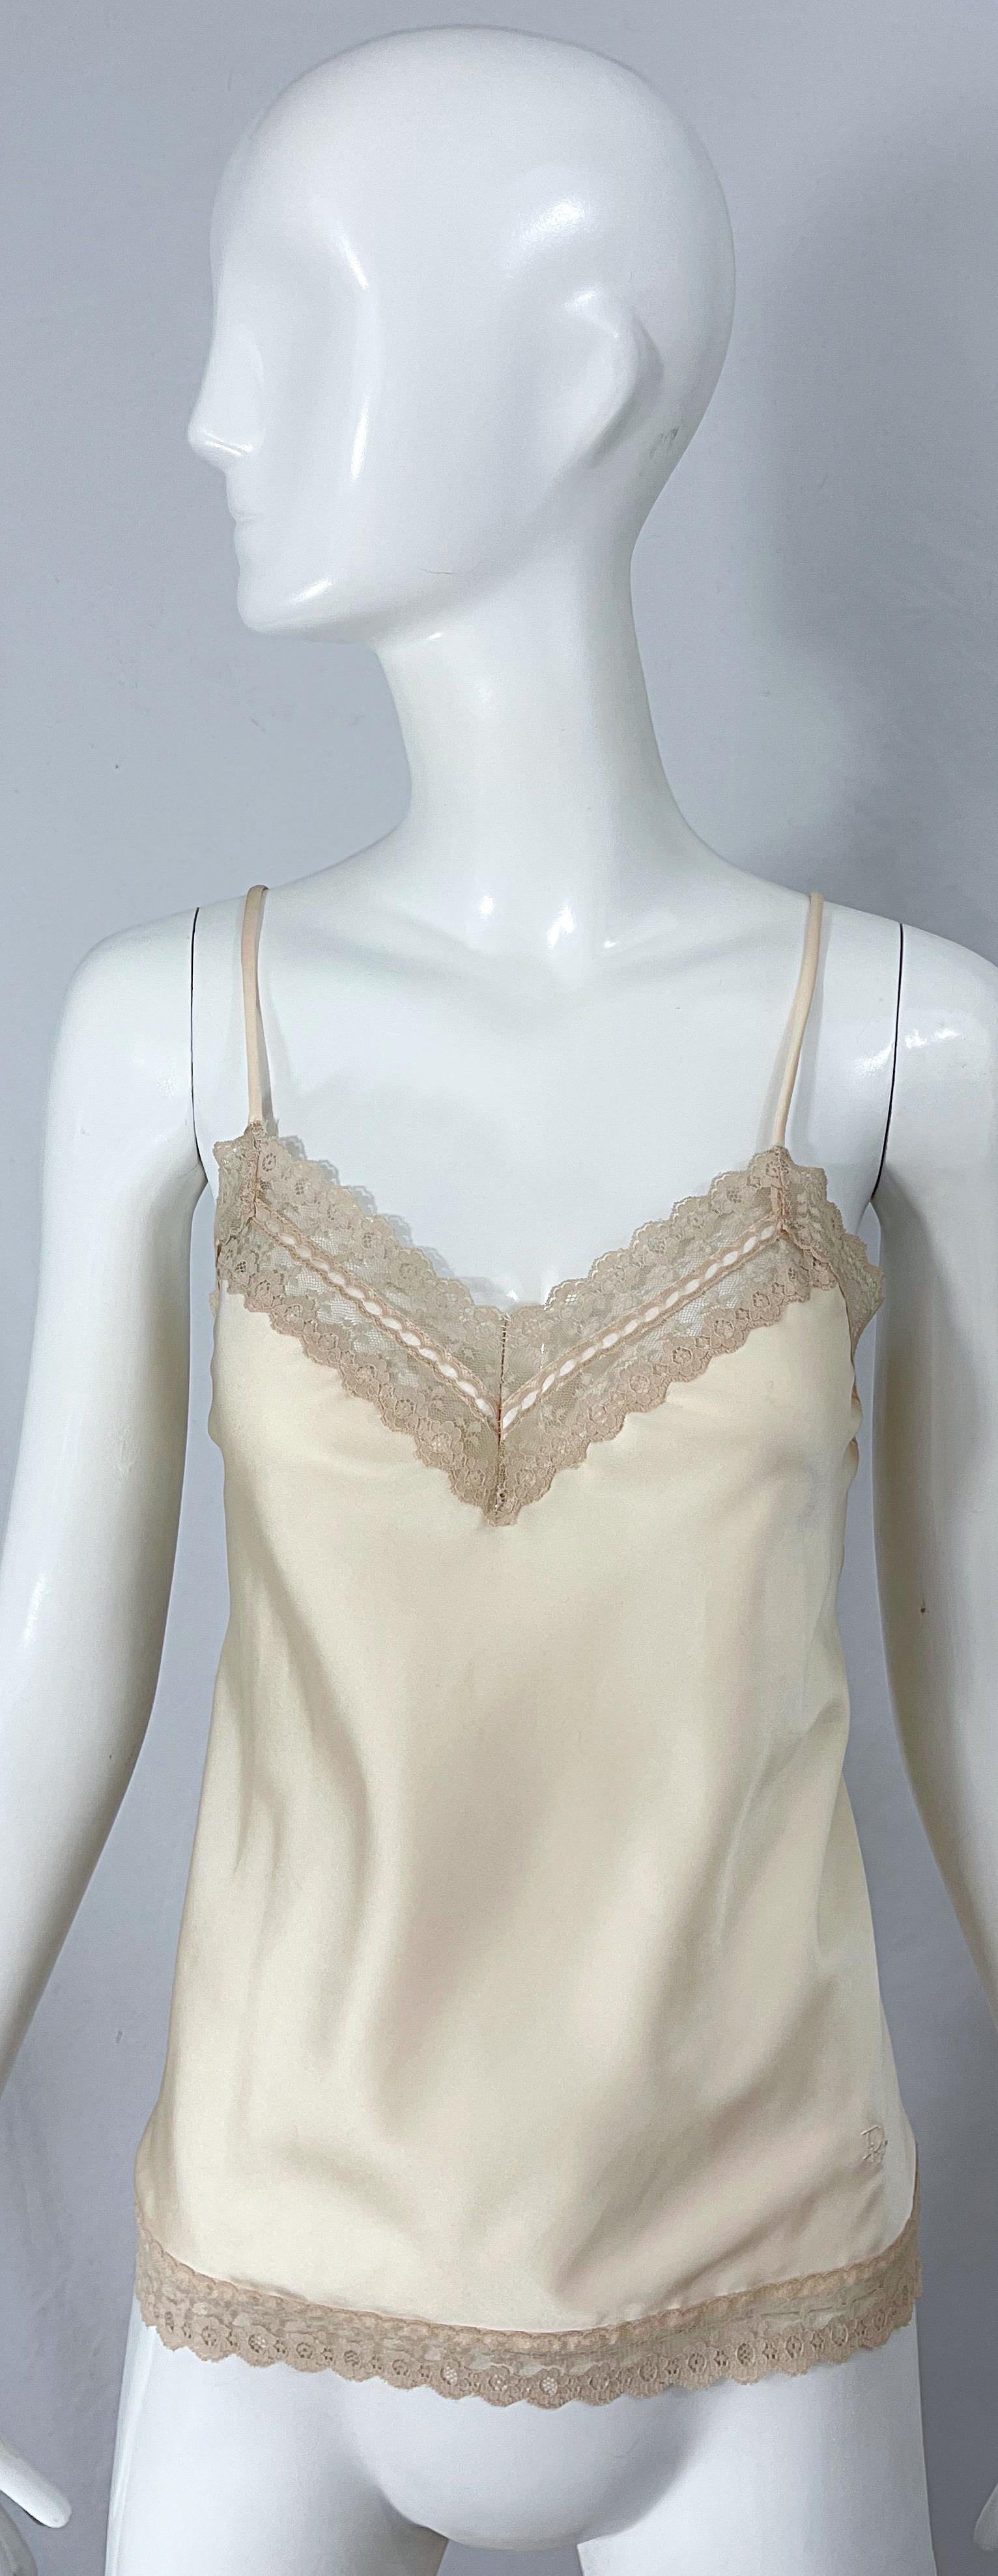 NWT 1980s Christian Dior Ivory Satin Lace Three Piece Cami 80s Lingerie PJ Set  For Sale 4